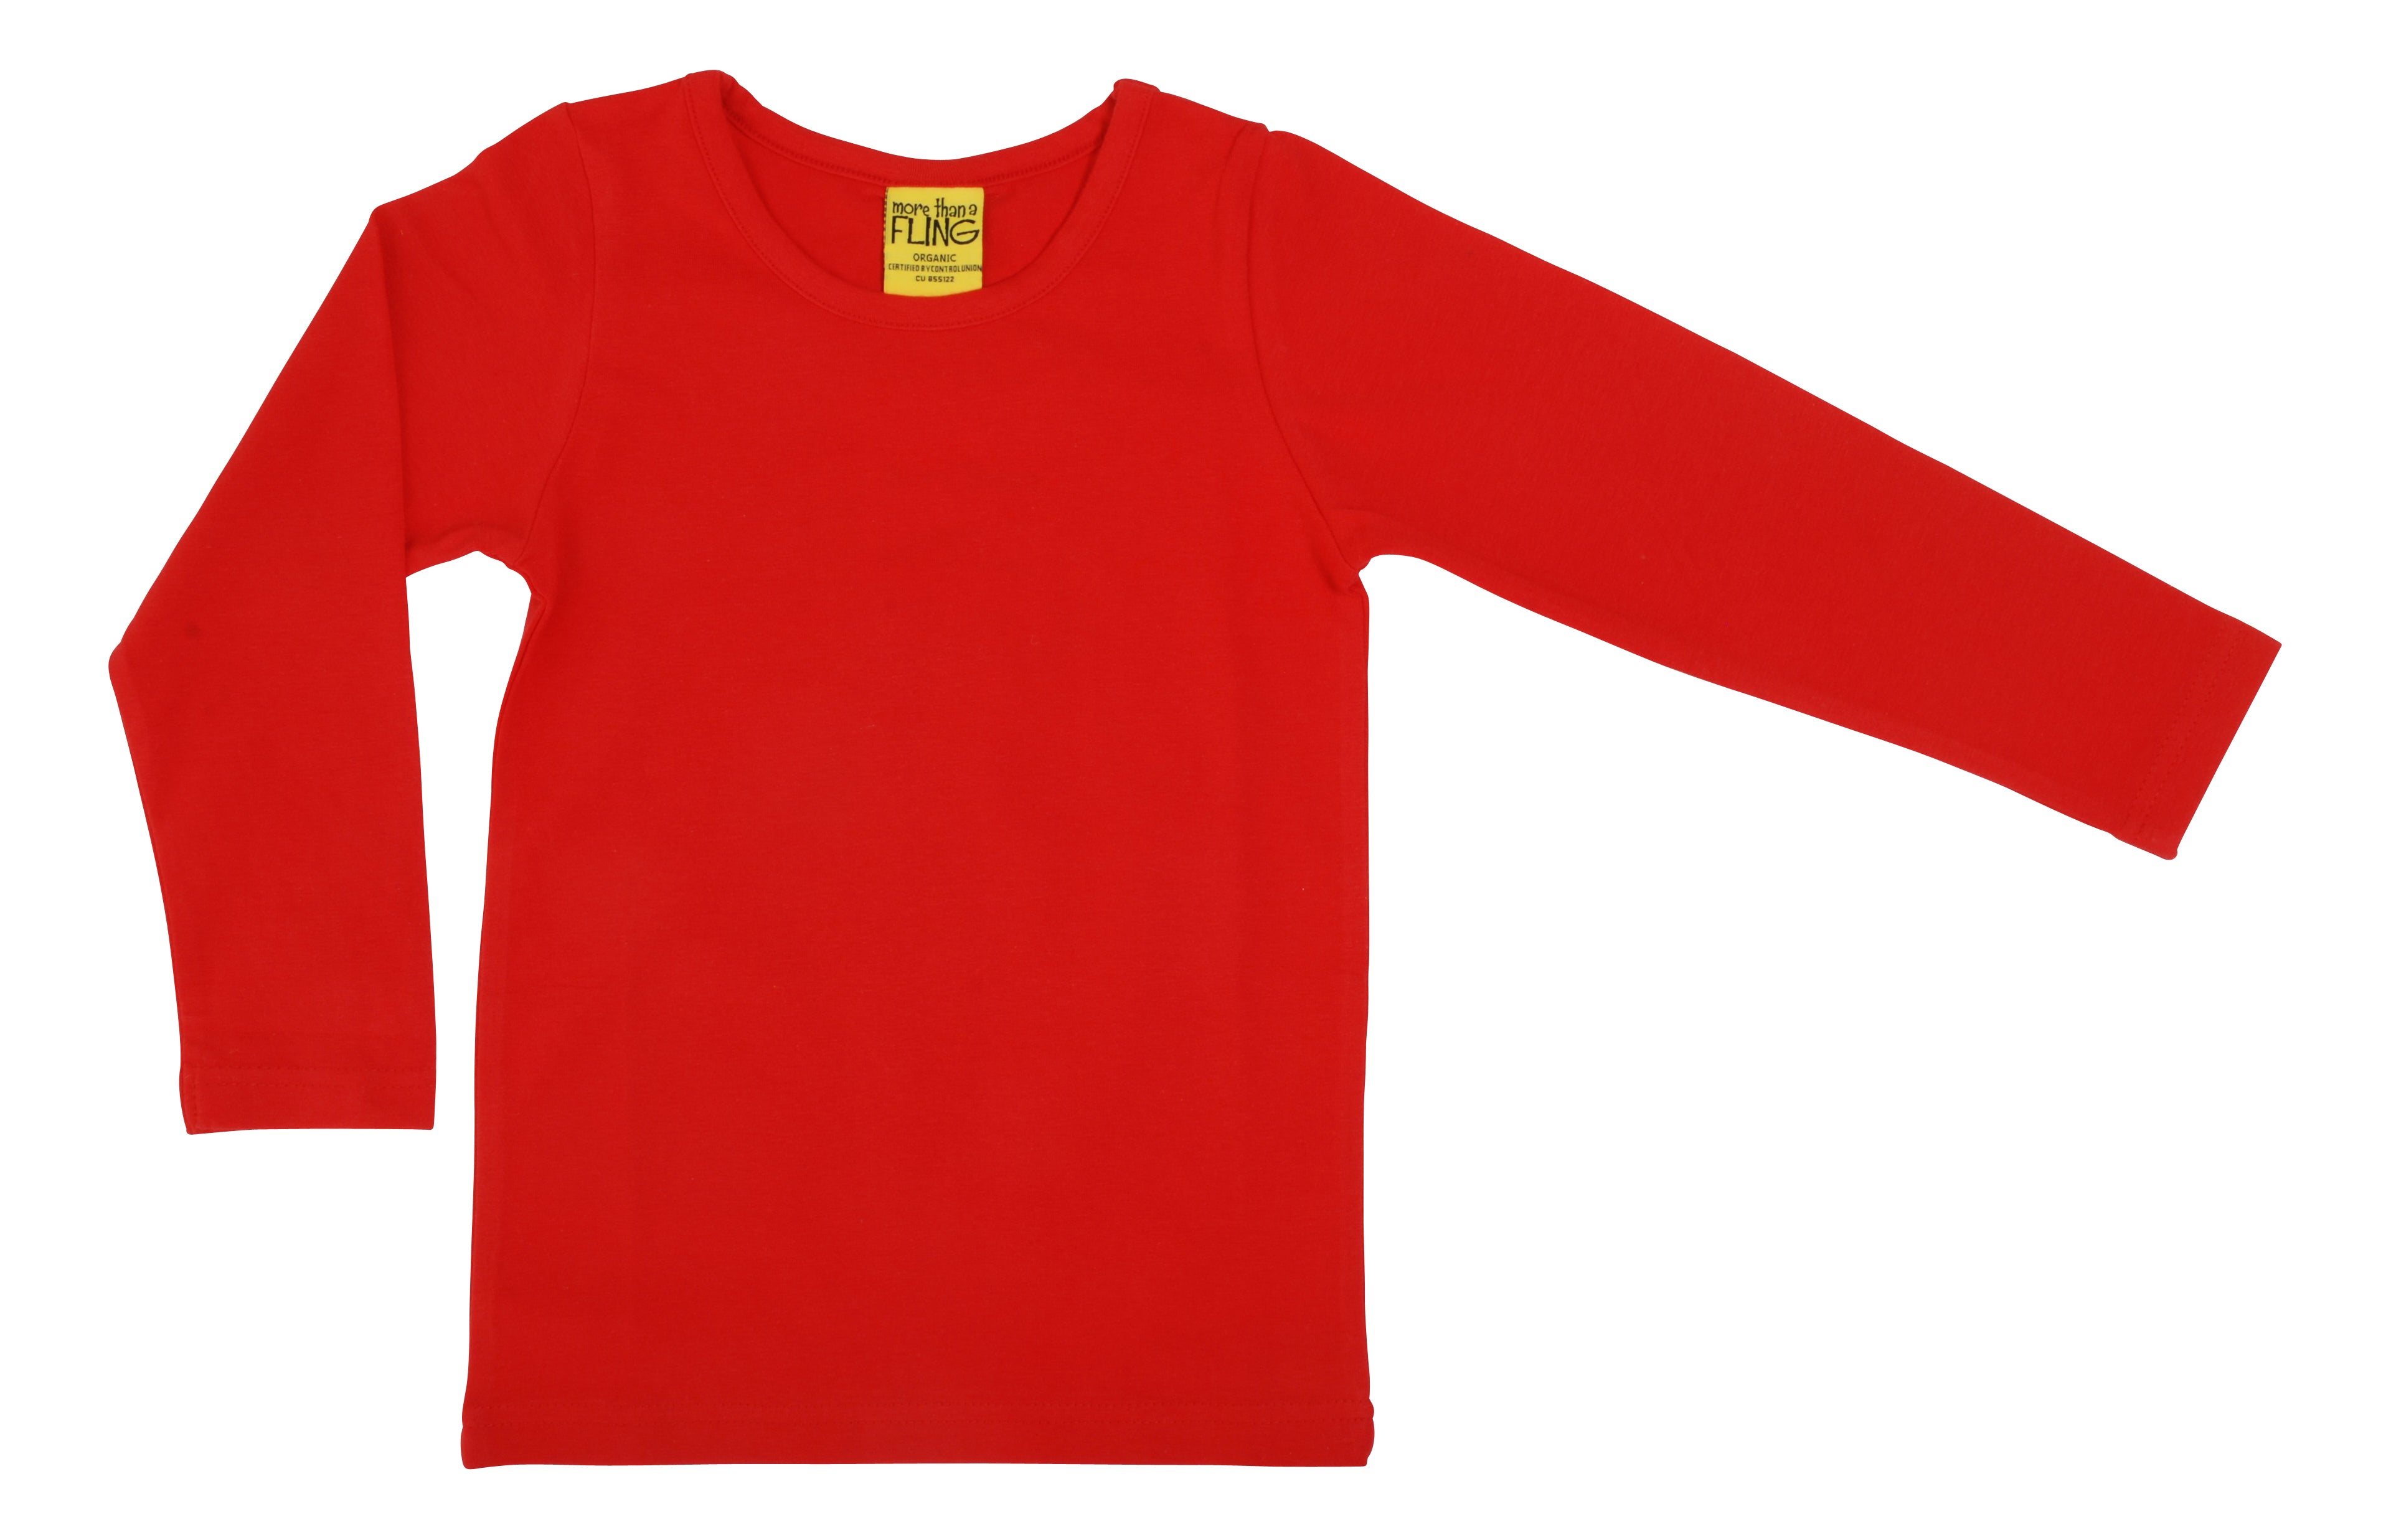 Longsleeve Poppy Red - More Than a Fling (Duns Sweden)